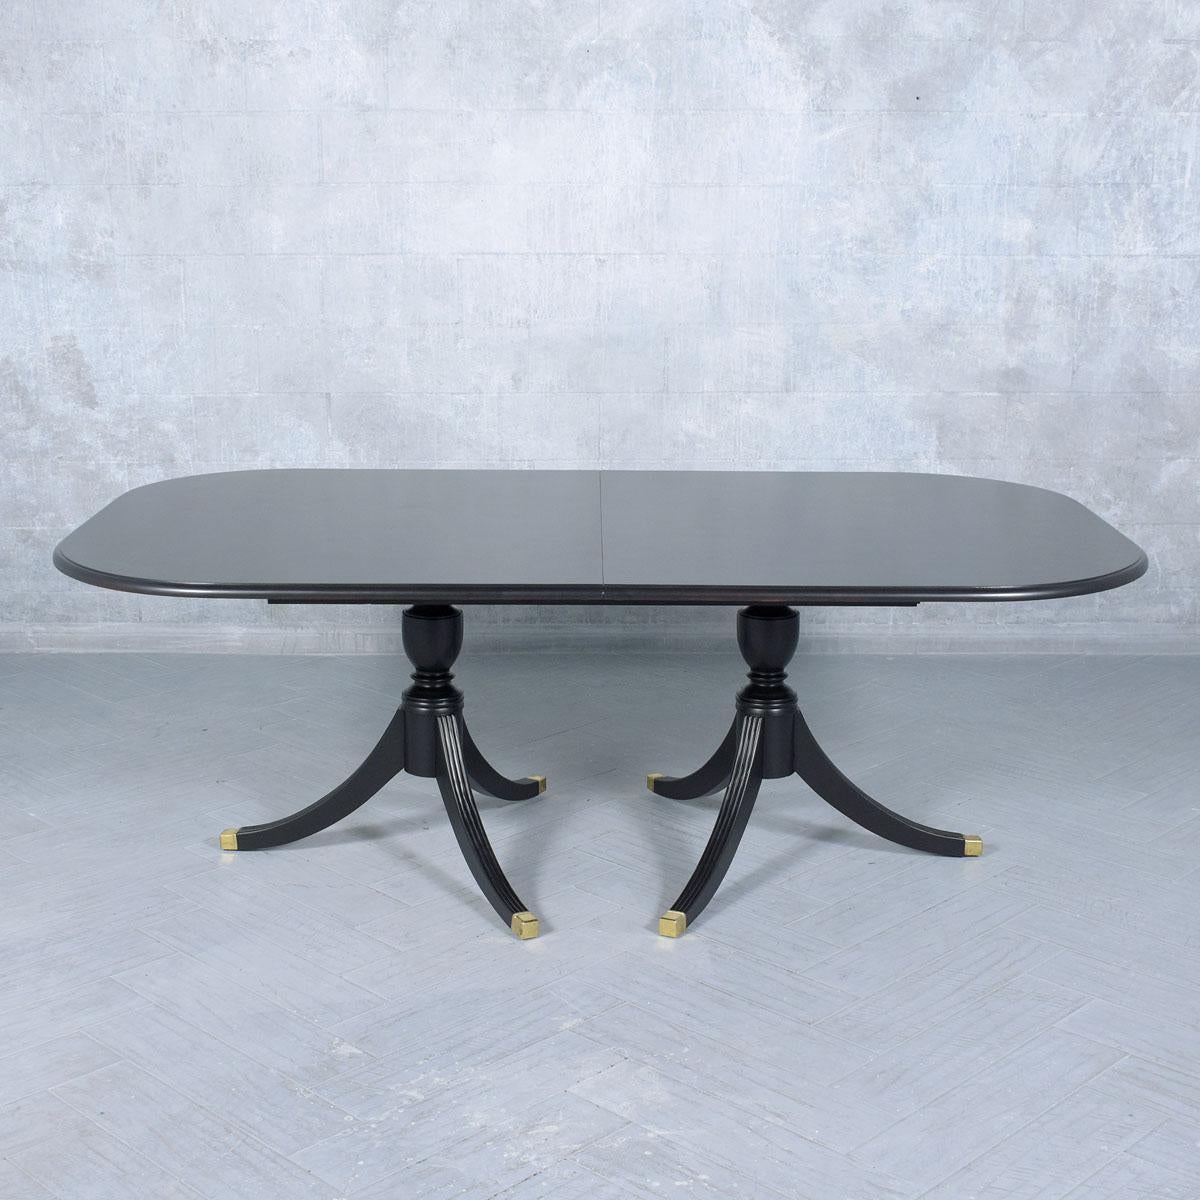 Early 20th Century Antique George III Mahogany Extendable Dining Table with Ebonized Finish